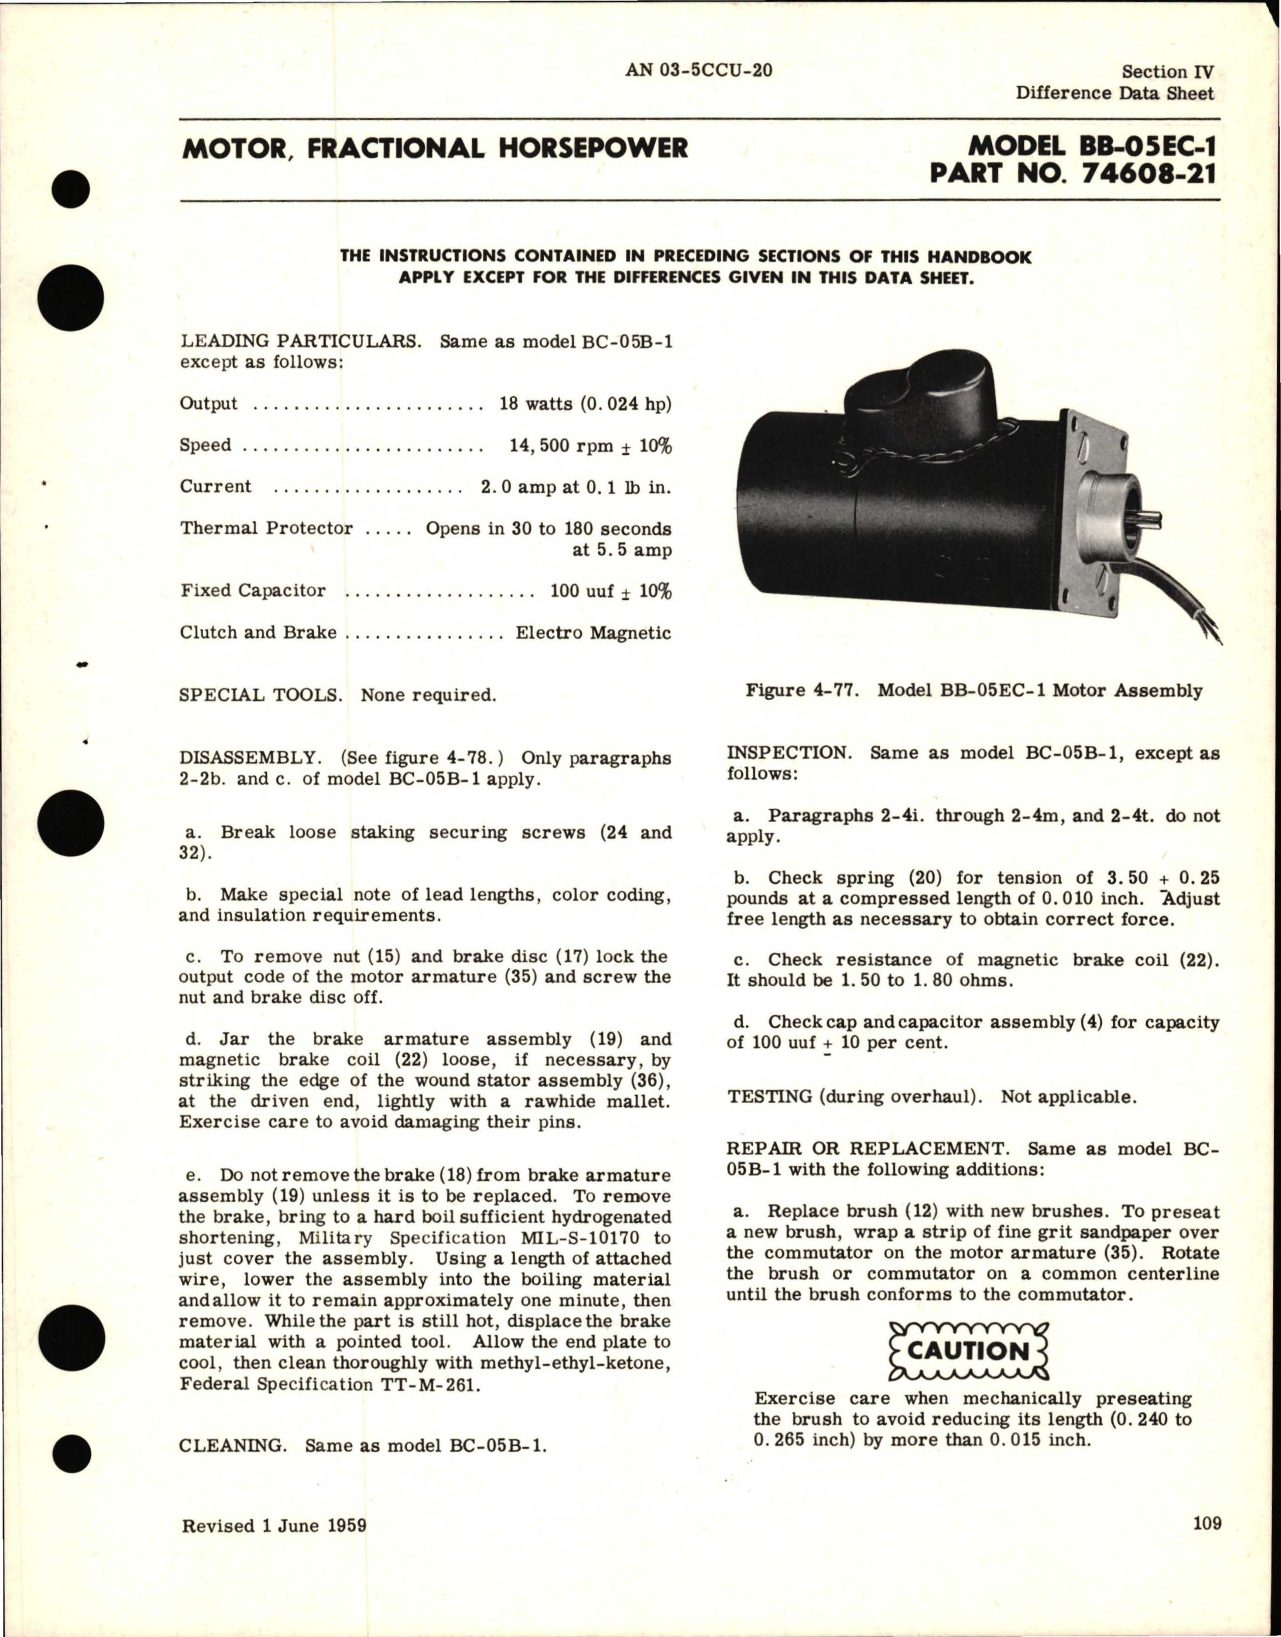 Sample page 9 from AirCorps Library document: Overhaul Instructions for Fractional Horsepower Motors - B Frame Series 